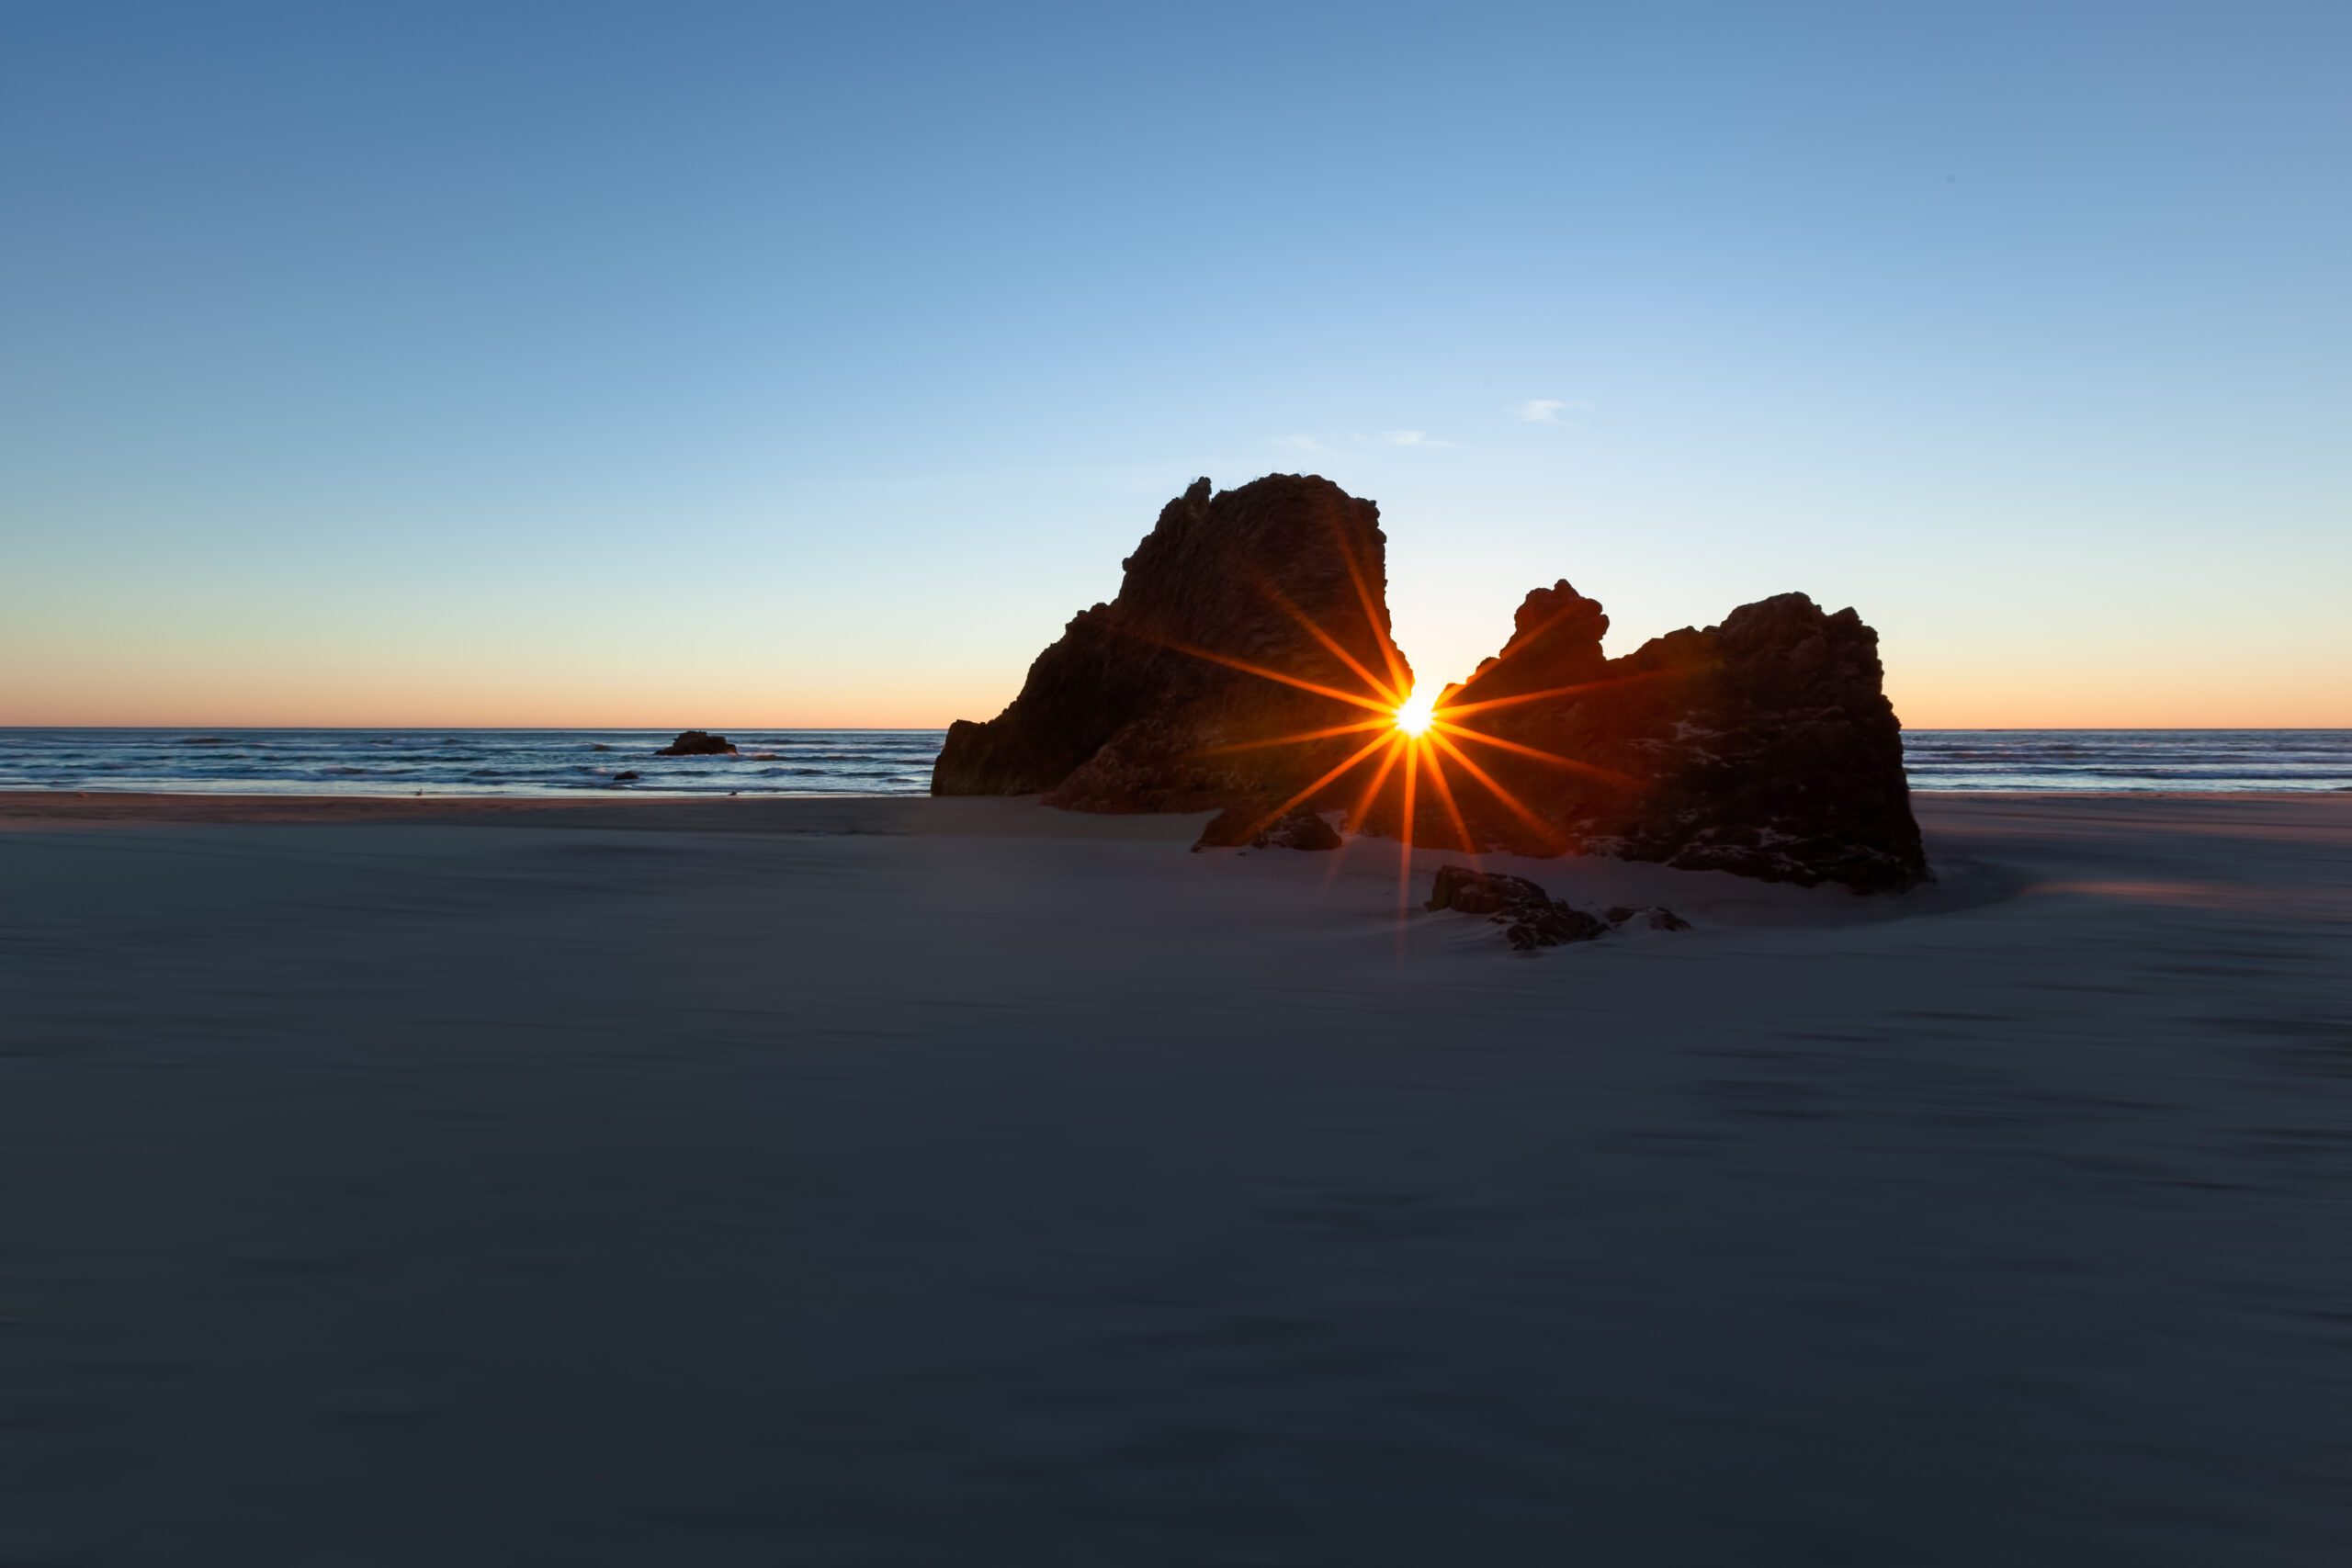 Experience the serene closure of day with this mesmerizing capture, where the Pacific kisses the sun goodbye through dramatic rocky silhouette .